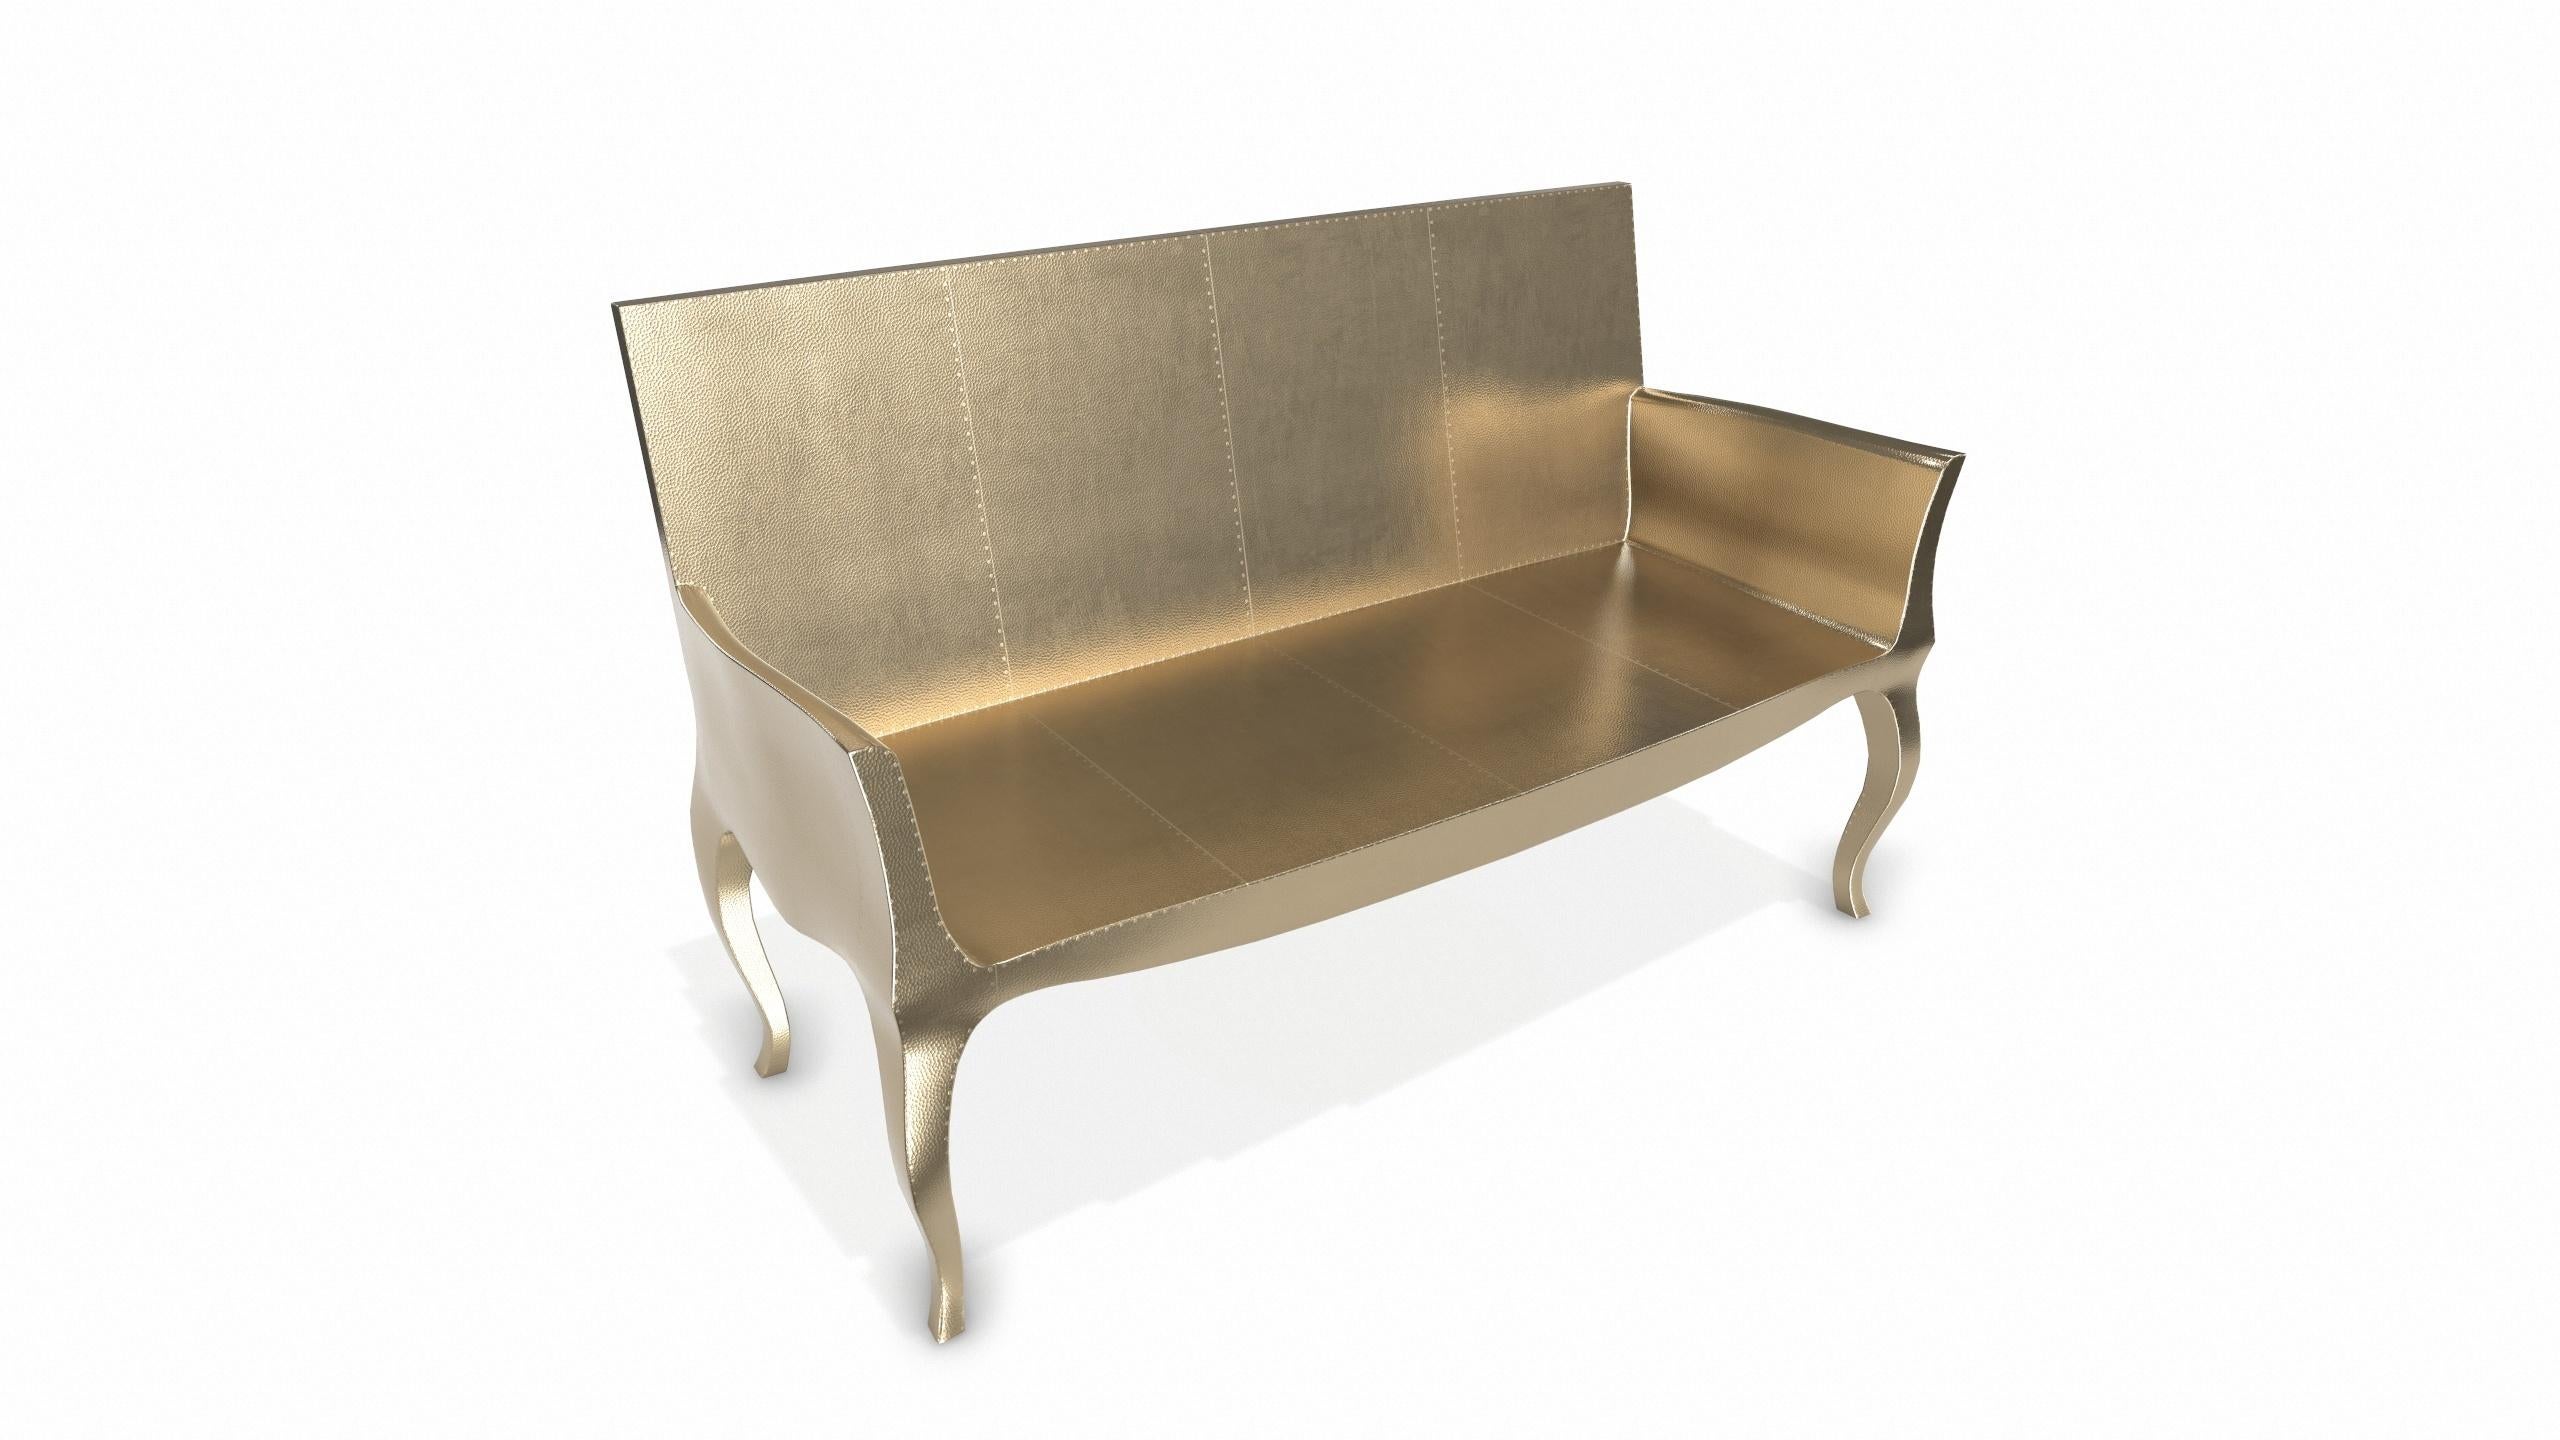 Louise Settee Art Deco Loveseats in Mid. Hammered Brass by Paul Mathieu For Sale 2